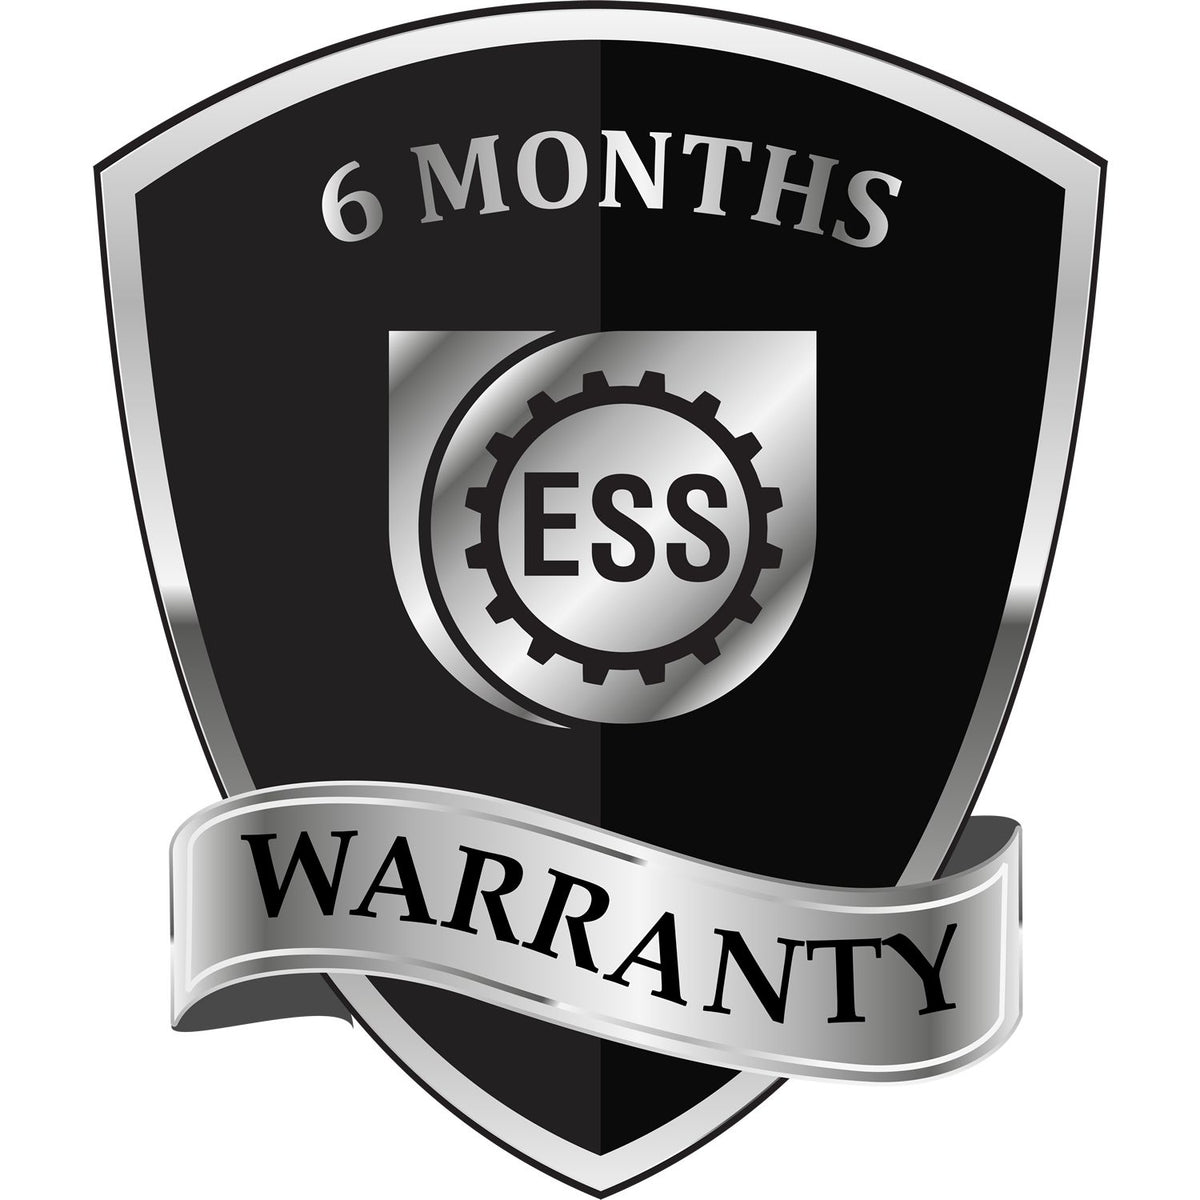 A badge or emblem showing a warranty icon for the Premium MaxLight Pre-Inked Kansas Engineering Stamp